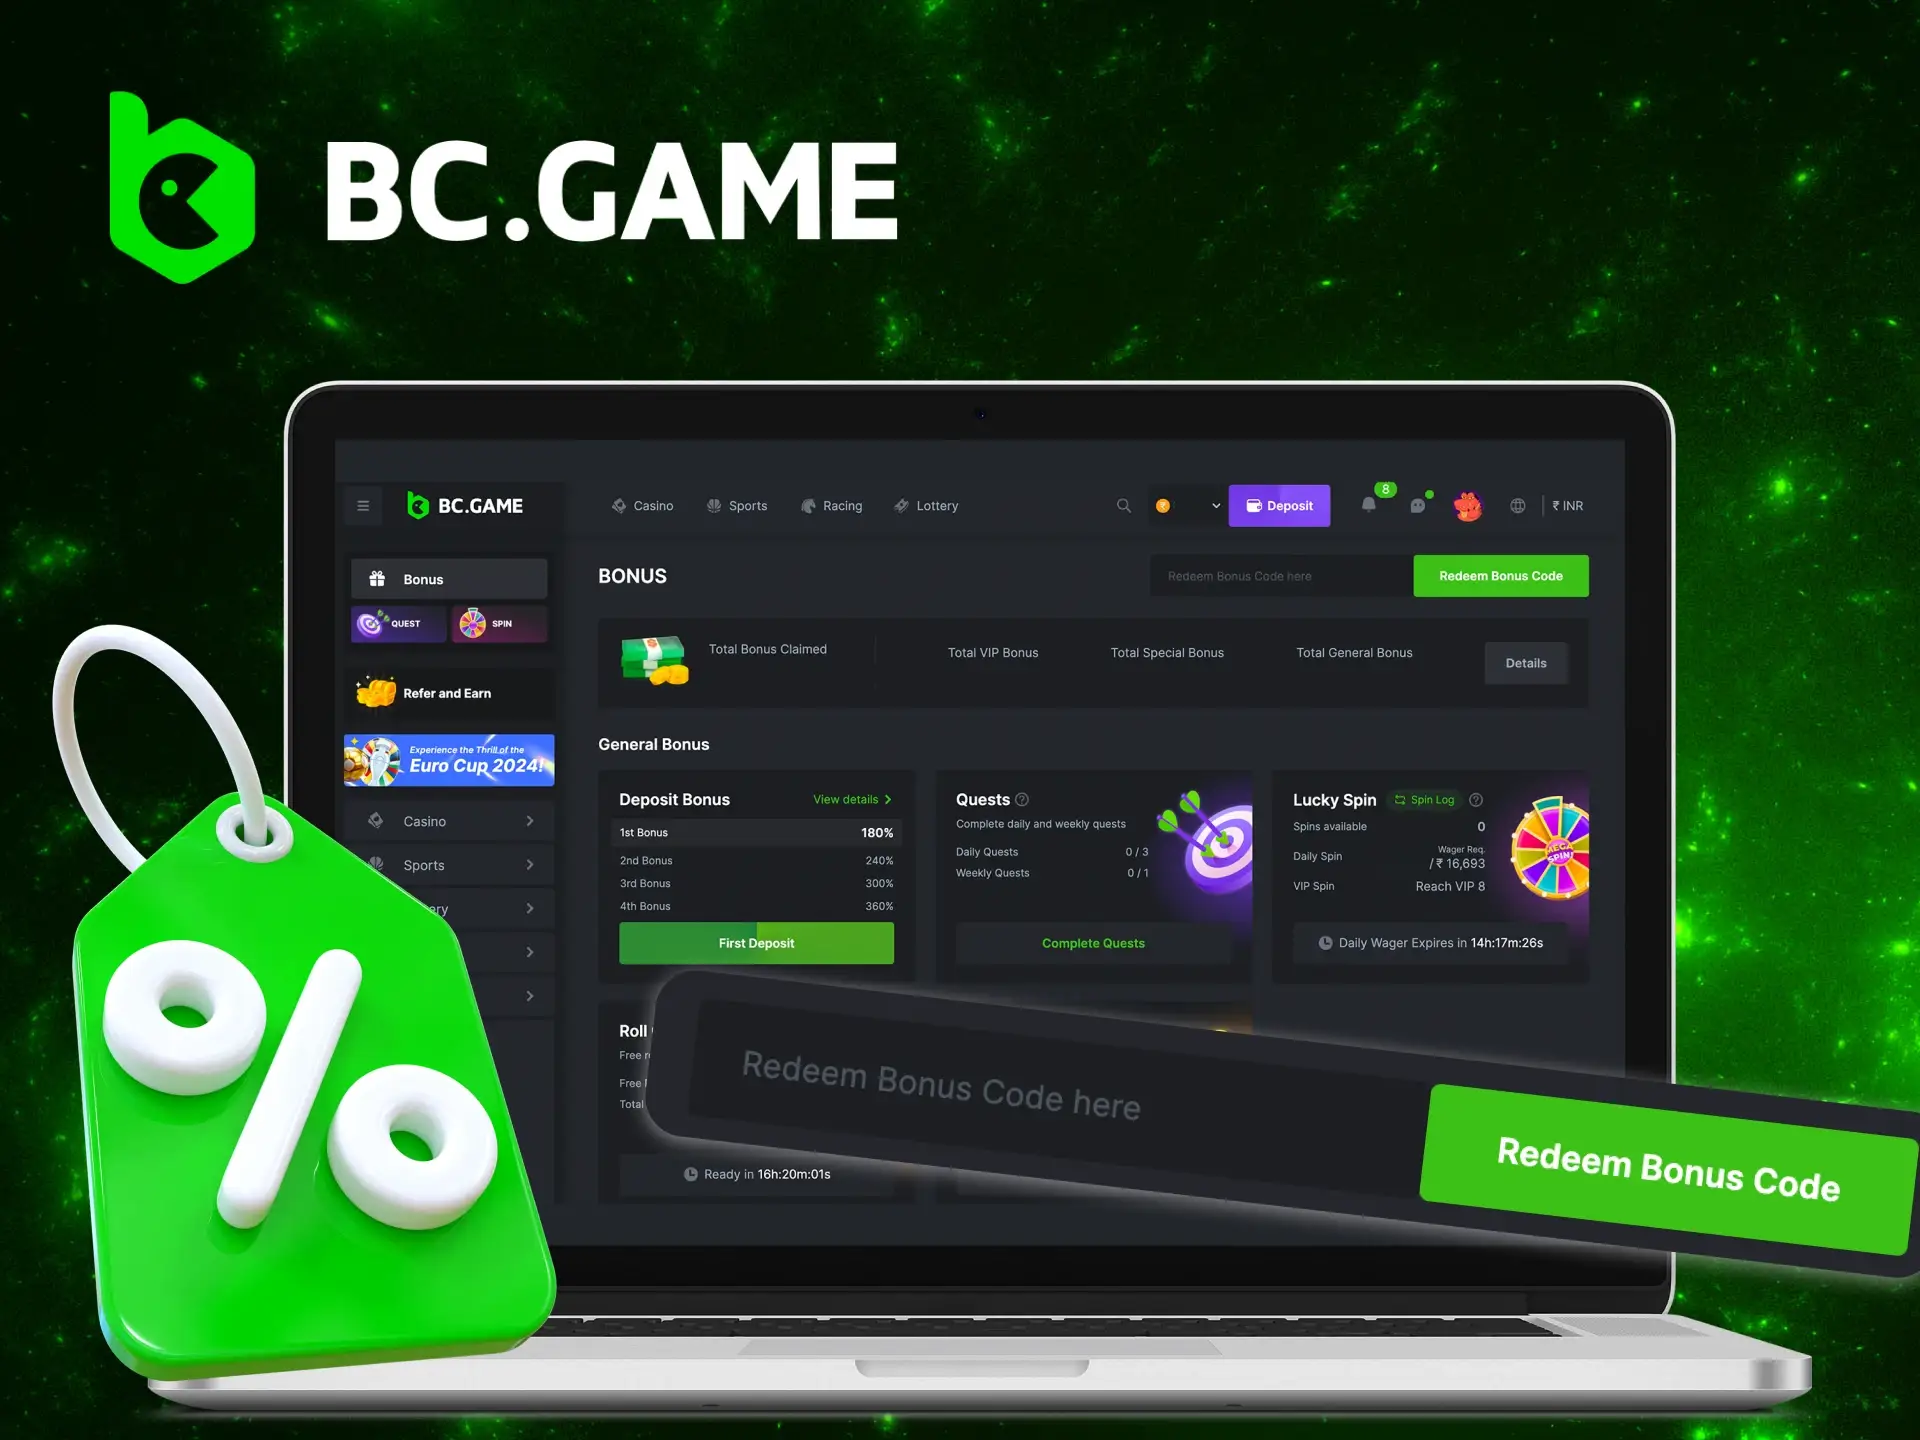 Are there any promotional codes for bonuses at the BC Game online casino.